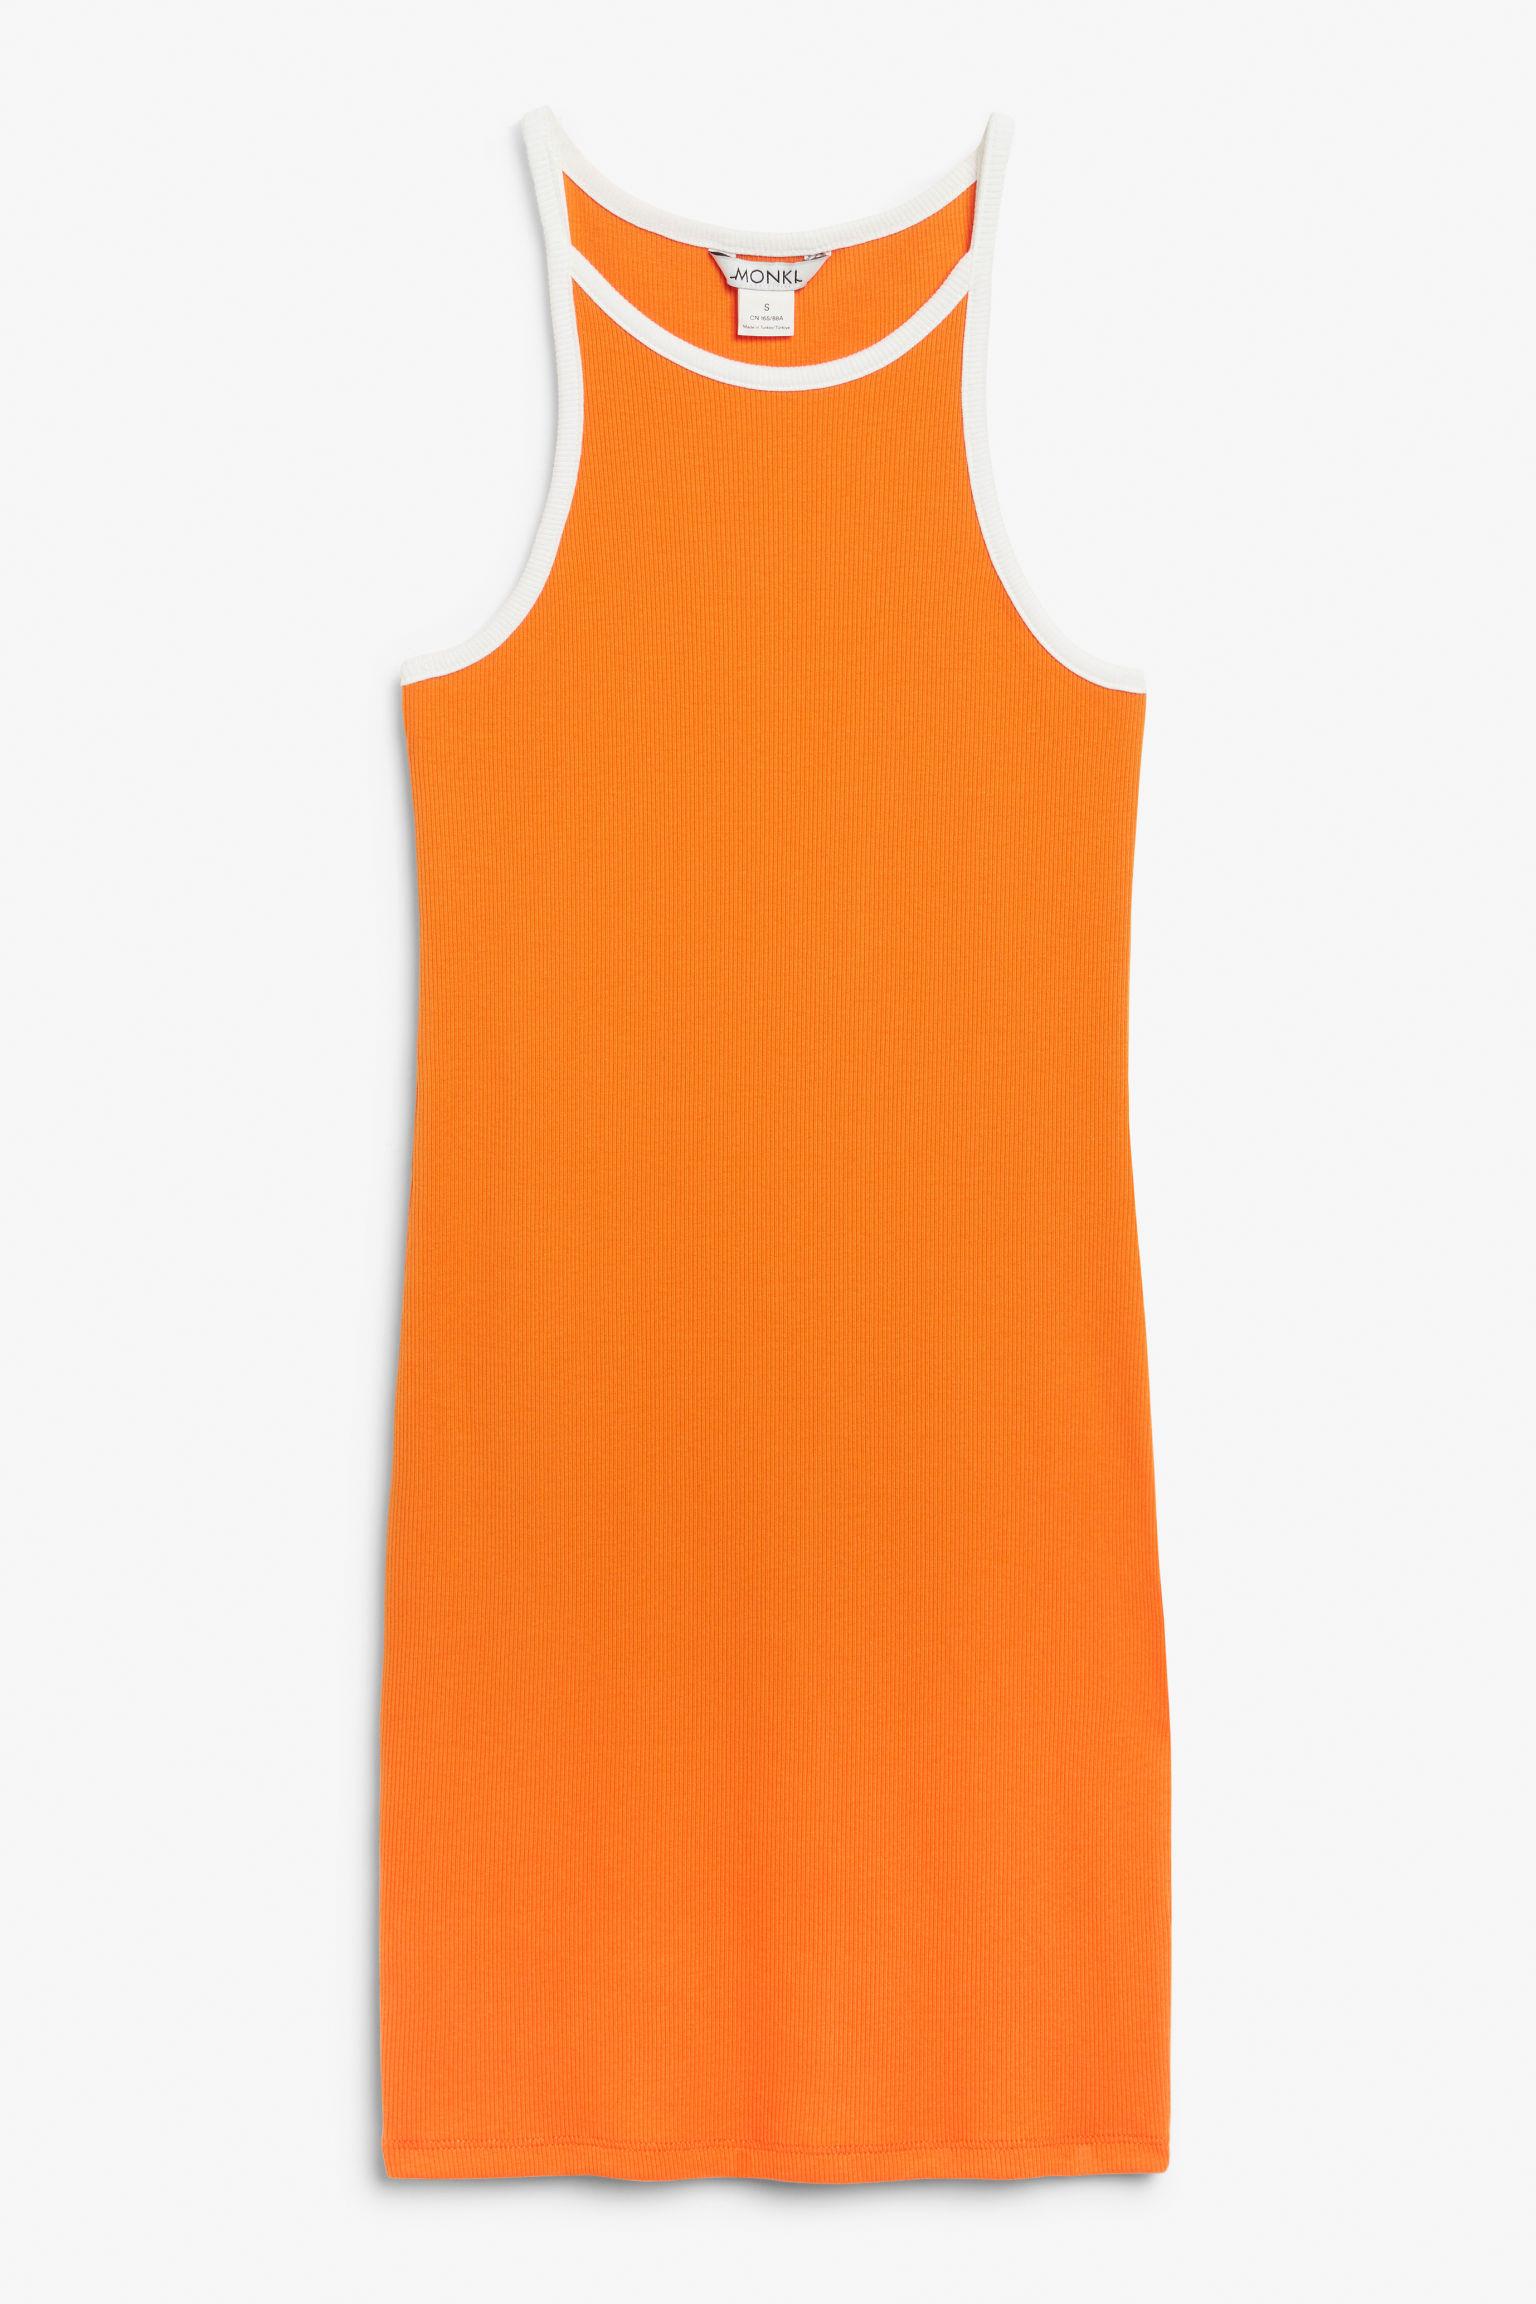 H&M Ribbed Tight Tank Top Dress in Orange | Lyst Canada